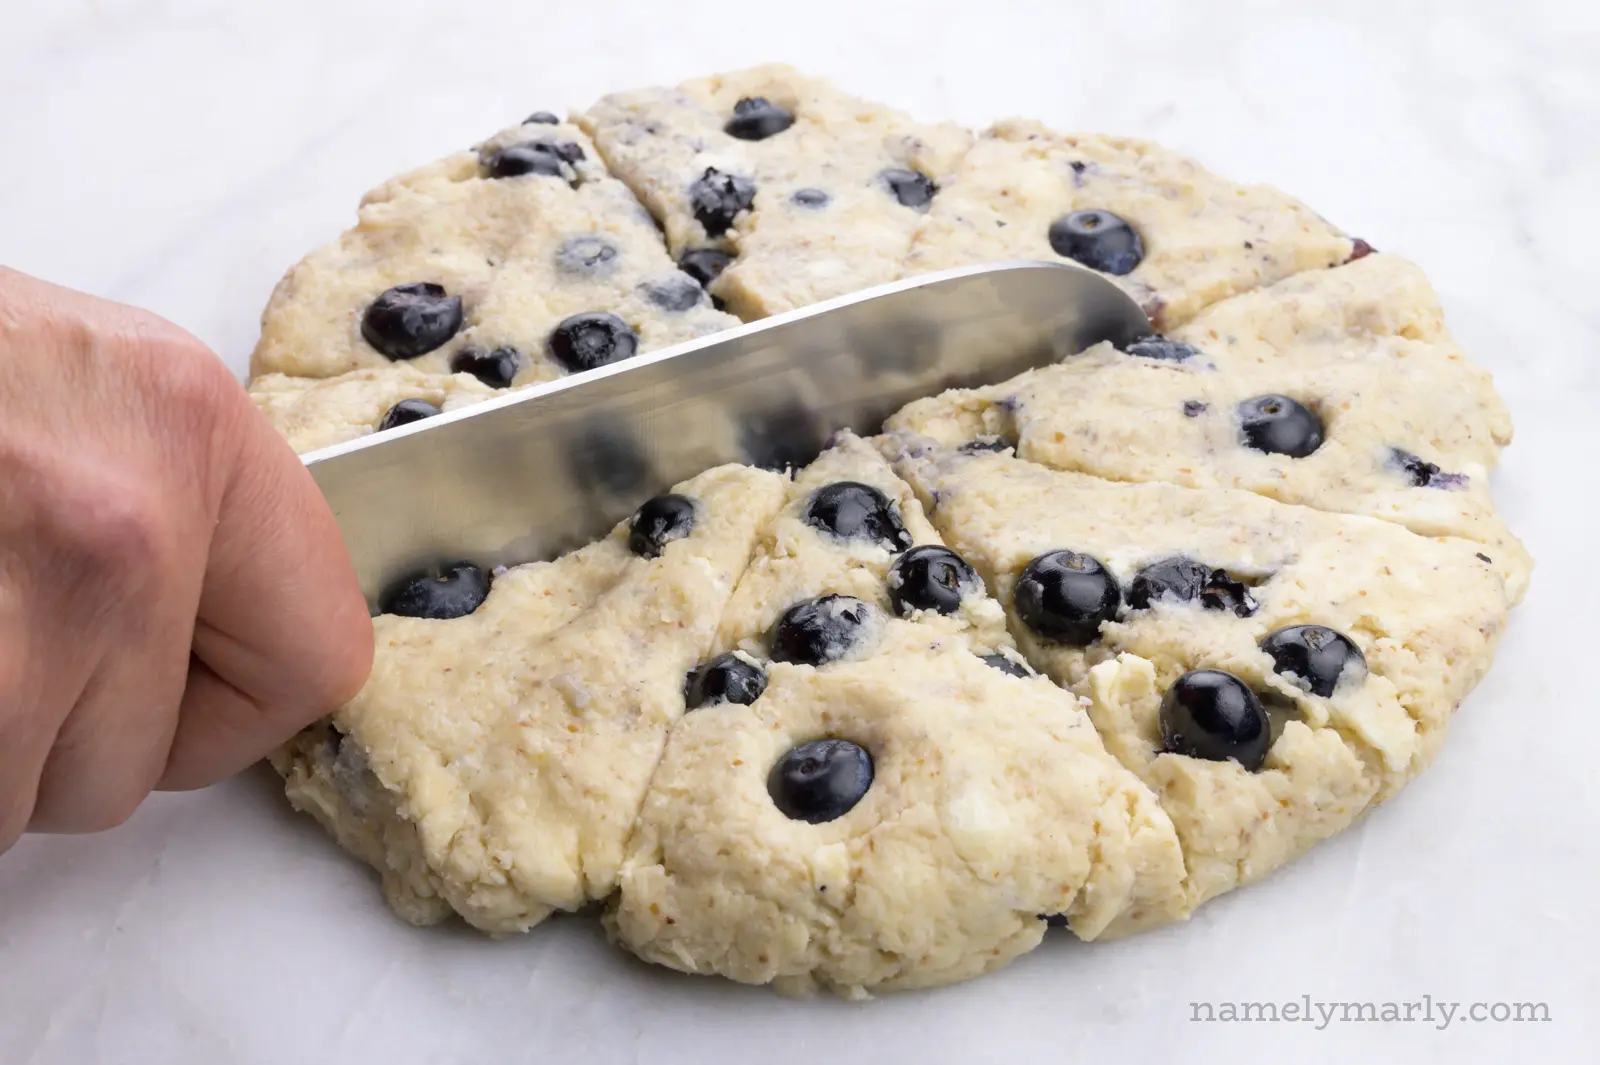 Dough with blueberries is in a disk and hand holding a knife is cutting it into slices.